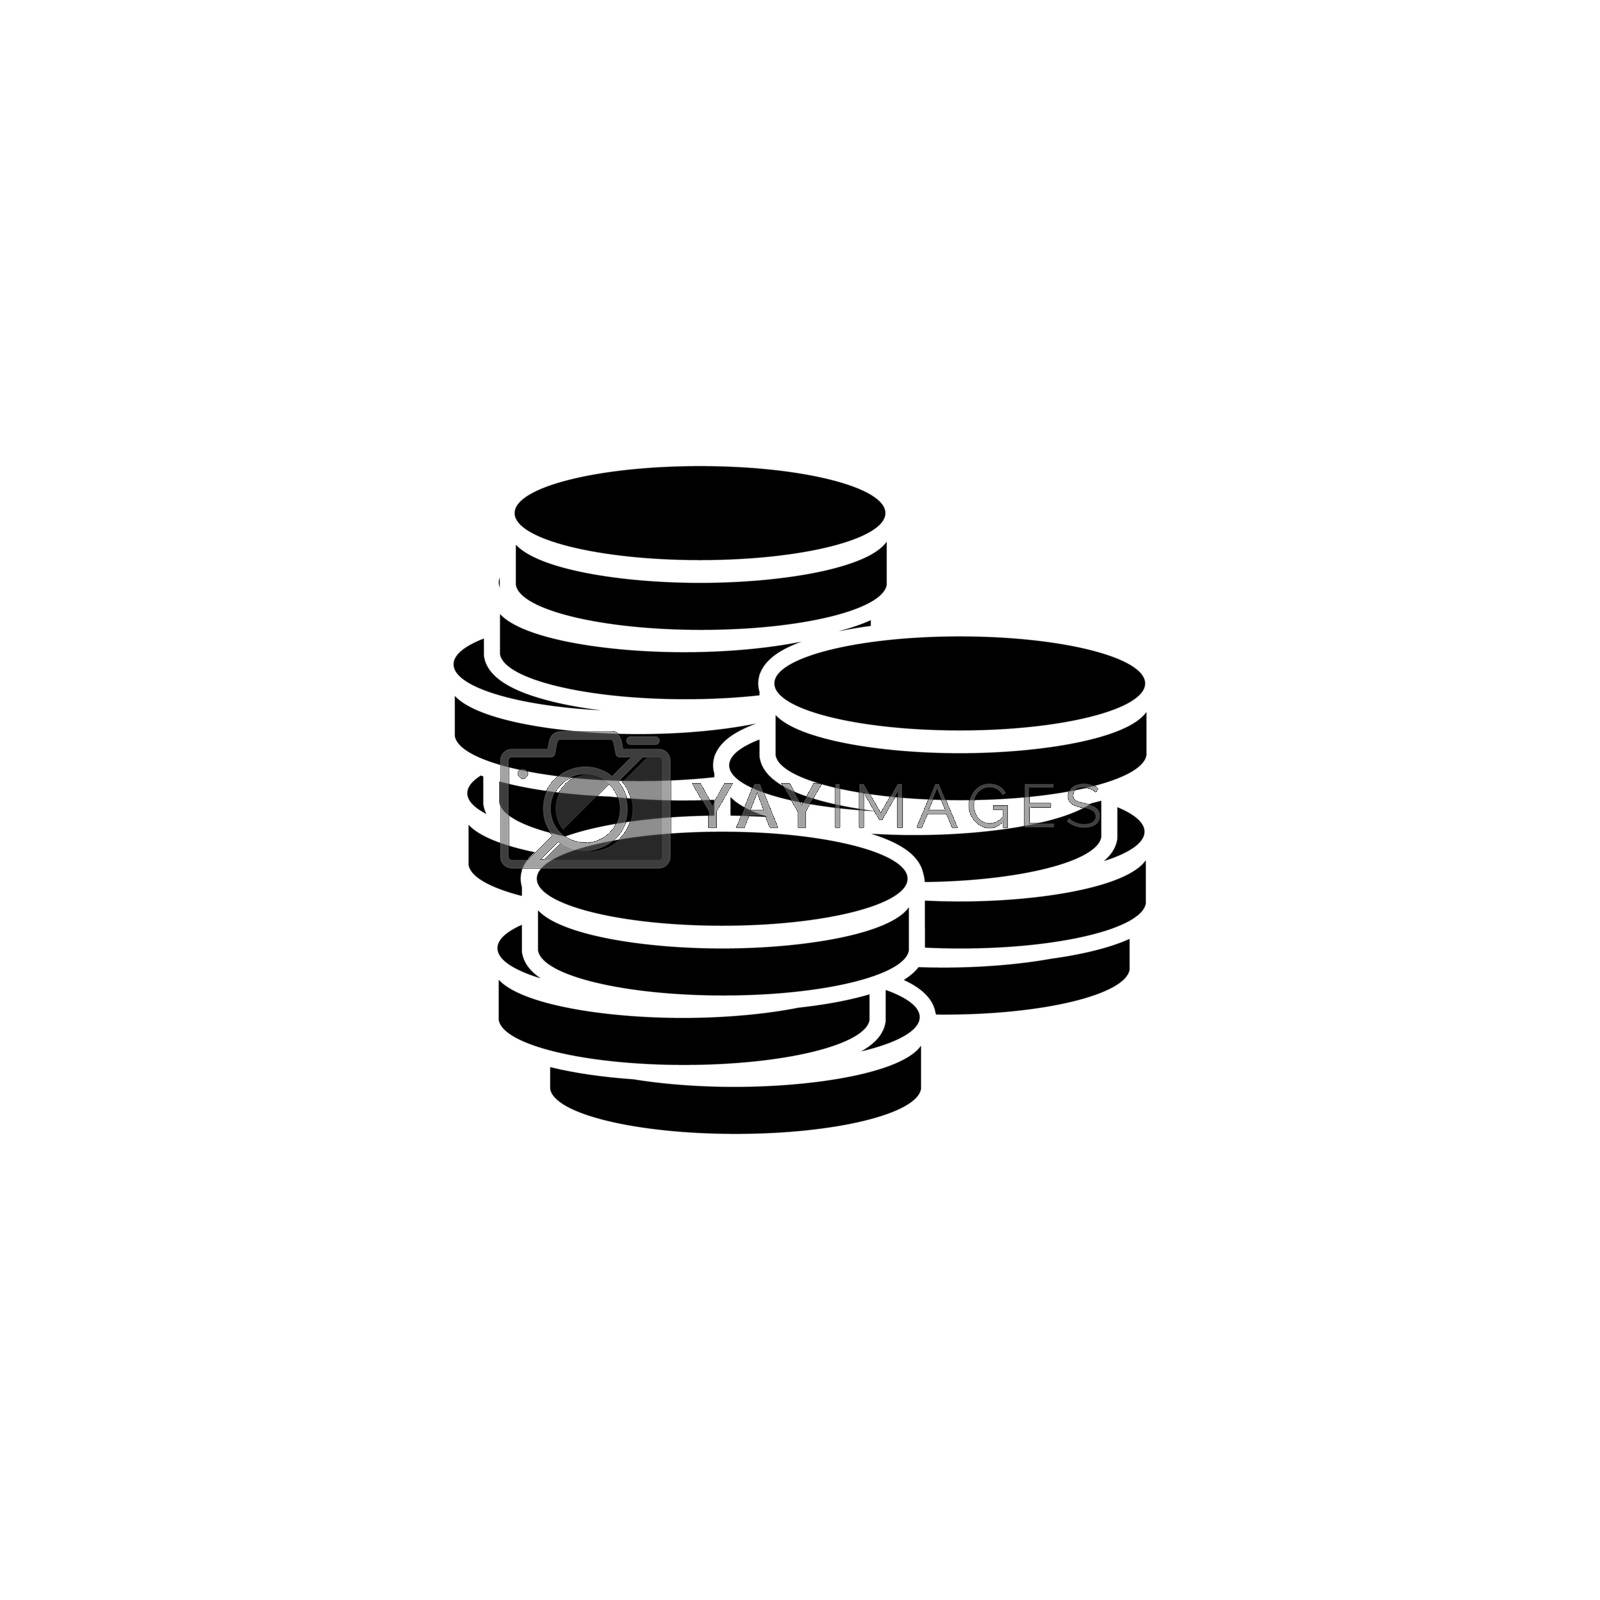 Royalty free image of Coins stack in flat style Money stacked coins icon by veronawinner